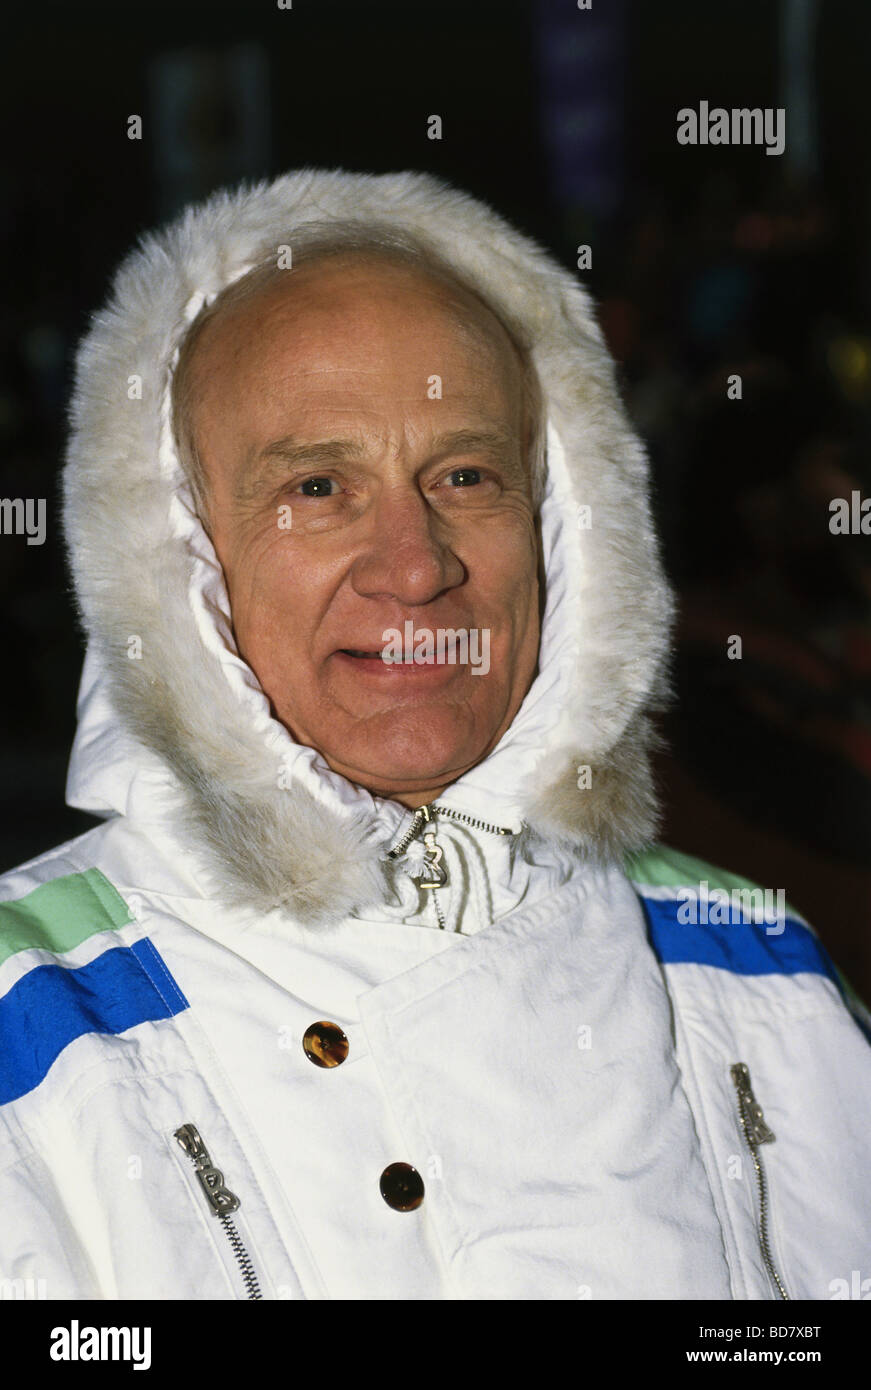 Aldrin, Buzz, * 20.1.1930, American astronaut, Second person on the moon, portrait, during making of "Fire, Ice and Dynamite", St Moritzersee, Switzerland, 8.2.1990, Stock Photo